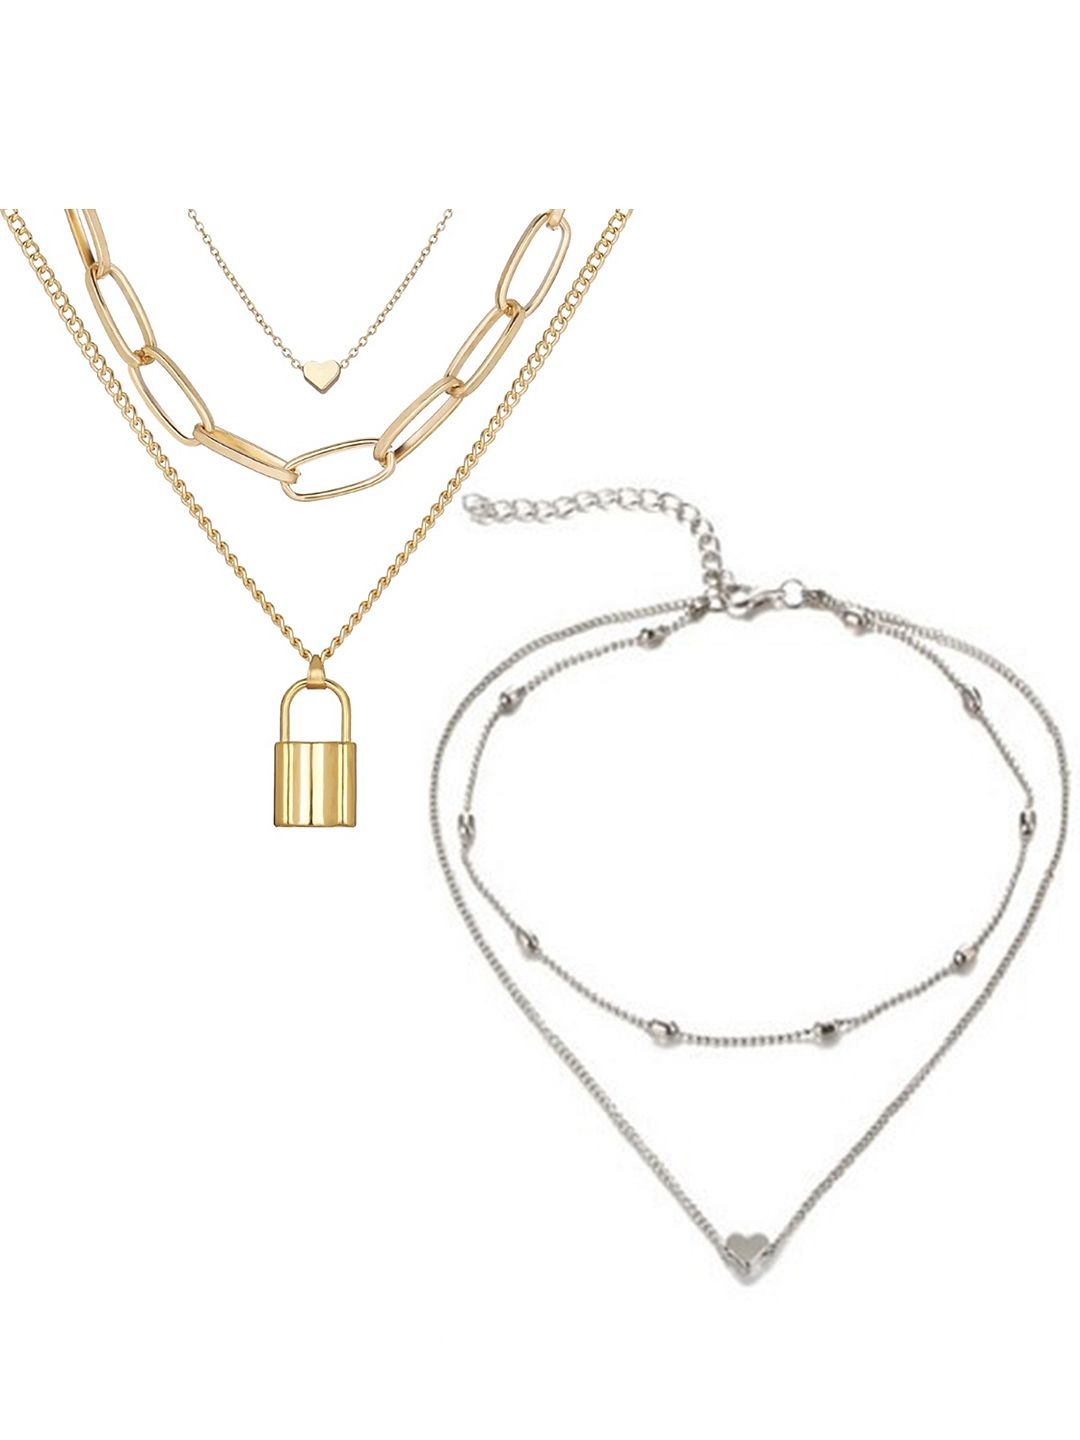 Vembley Set of 2 Gold-Plated & Silver-Plated Layered Necklaces Price in India